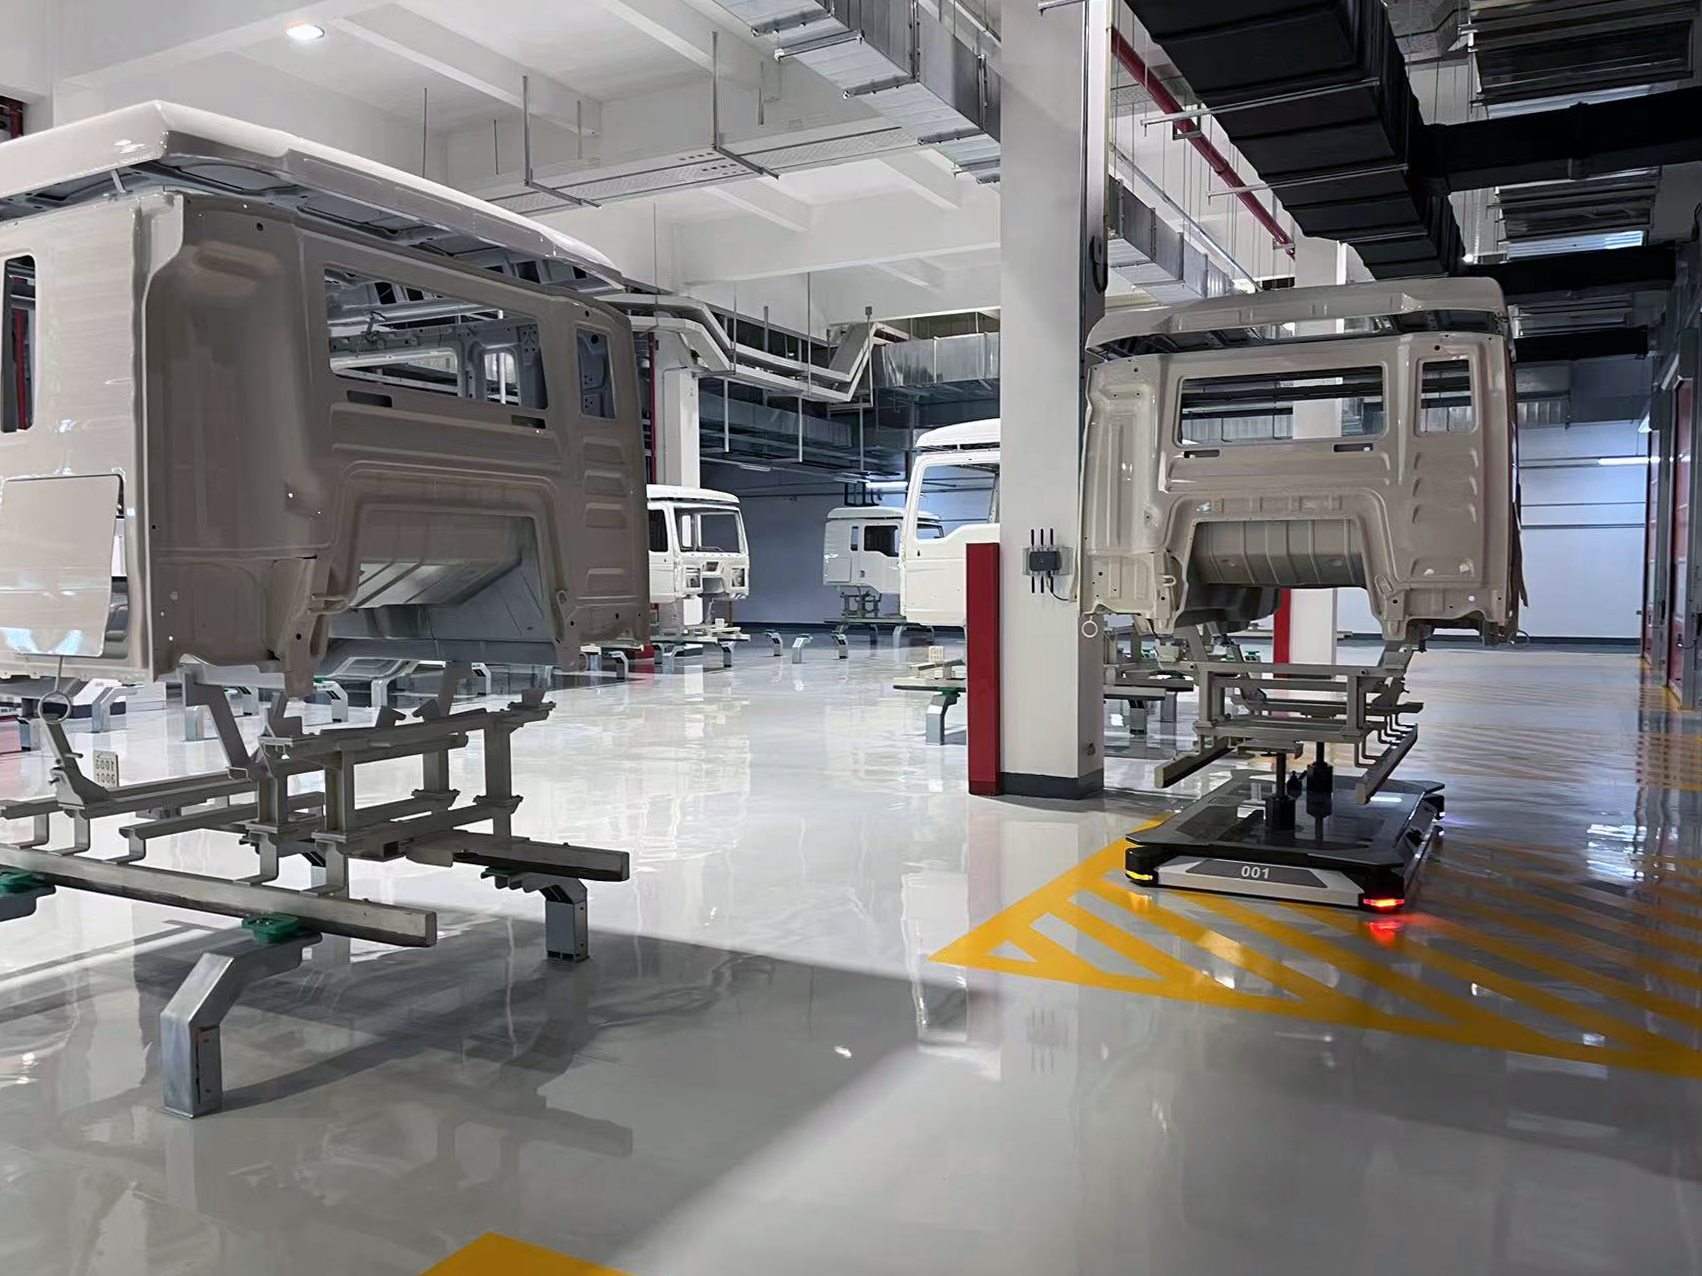 Low-slung AGVs carrying truck cabs in a shiny factory. 